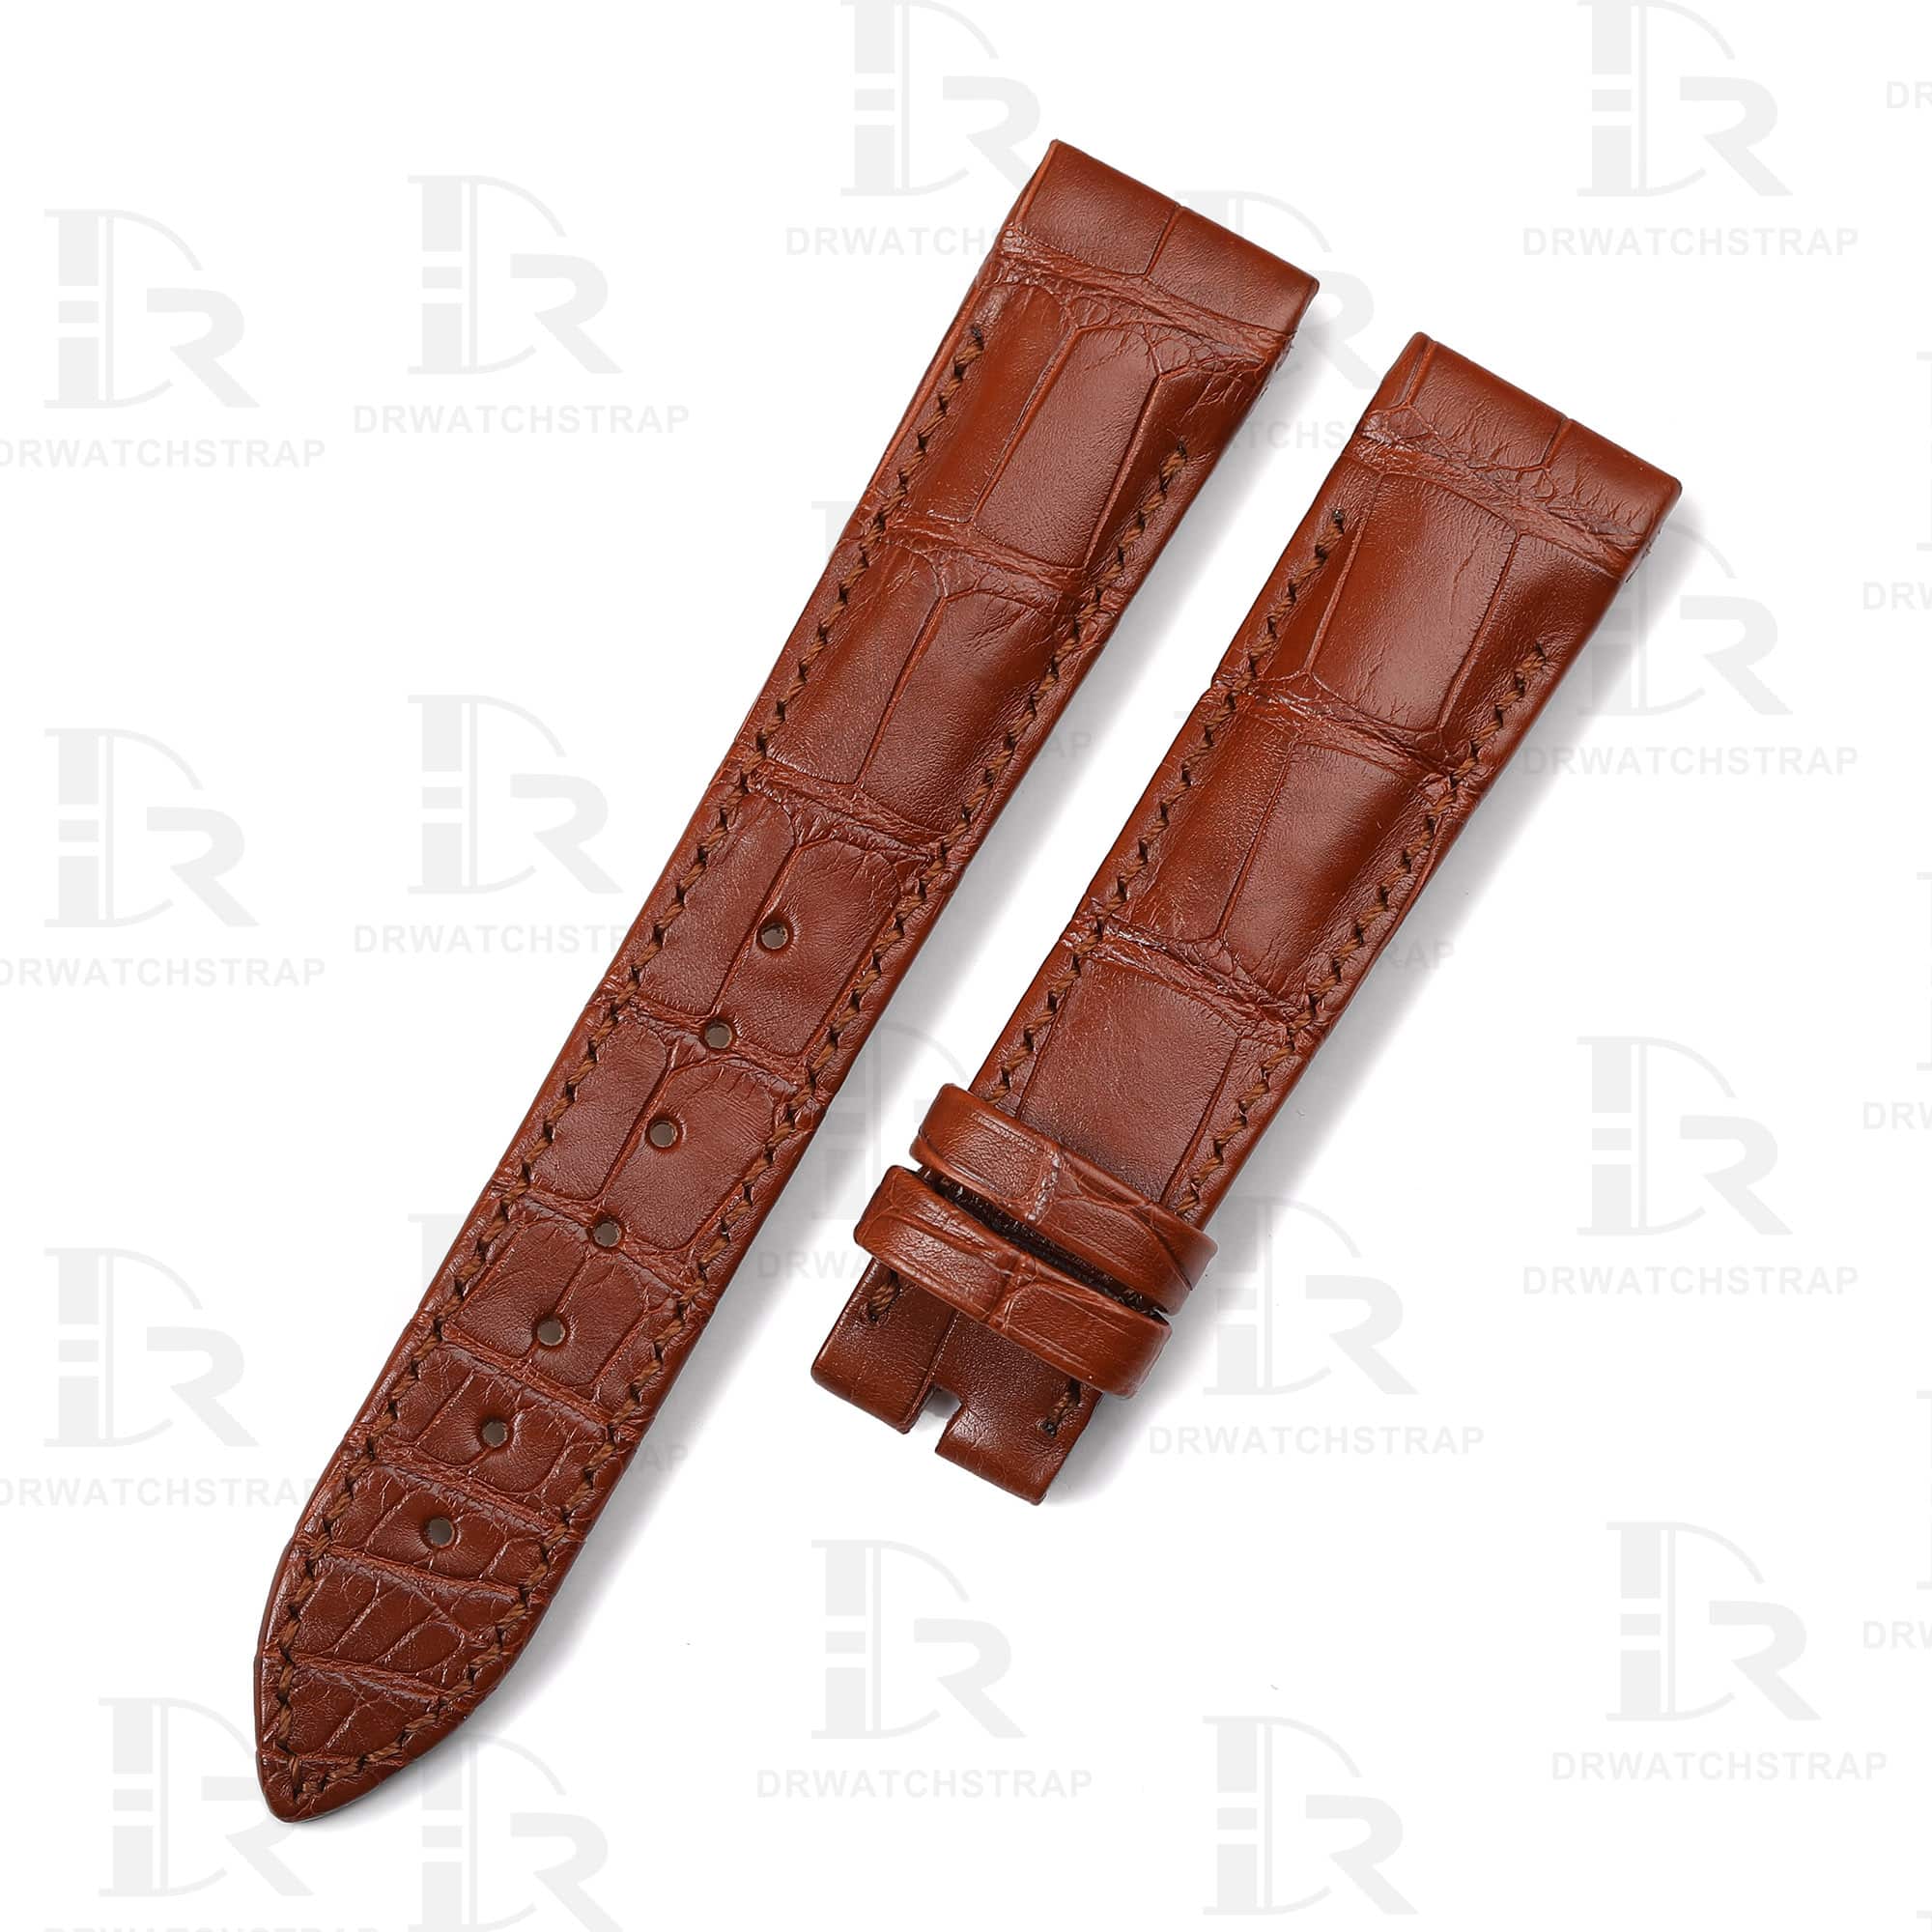 Replacement Aftermarket Brown leather watch band for Franck Muller Conquistador 8006 SC strap